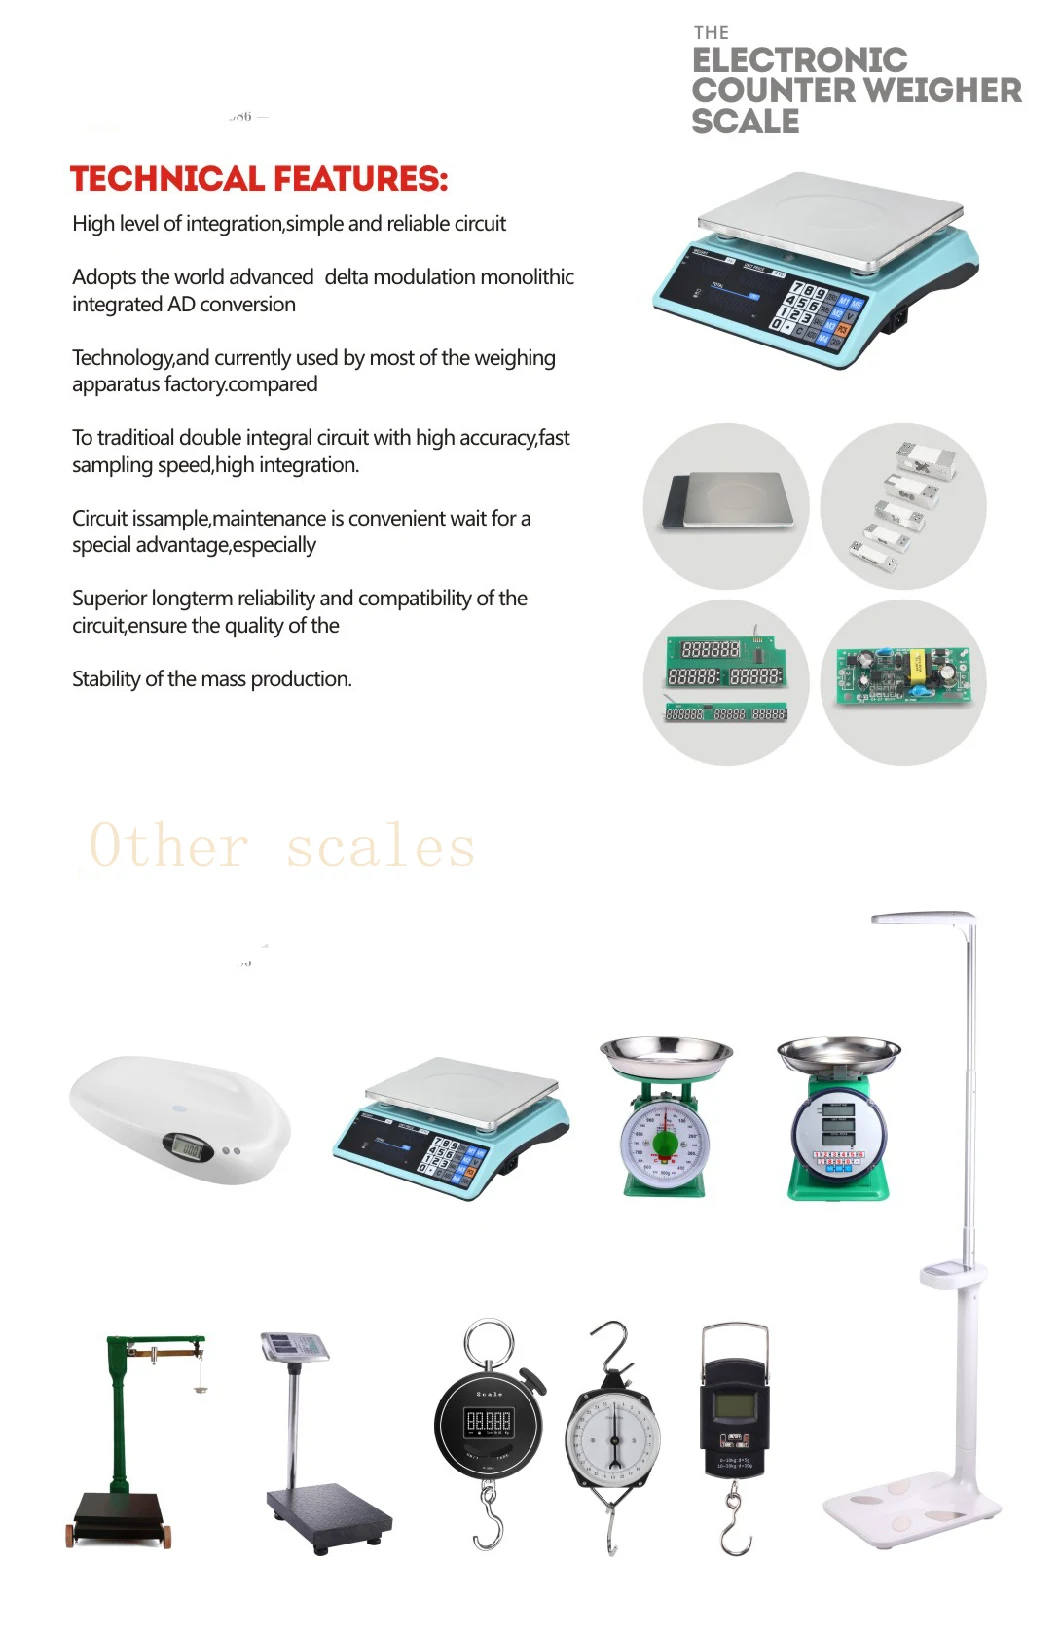 Smart Weight Scale Digital Machine 30kg Counting Price Computing Scale